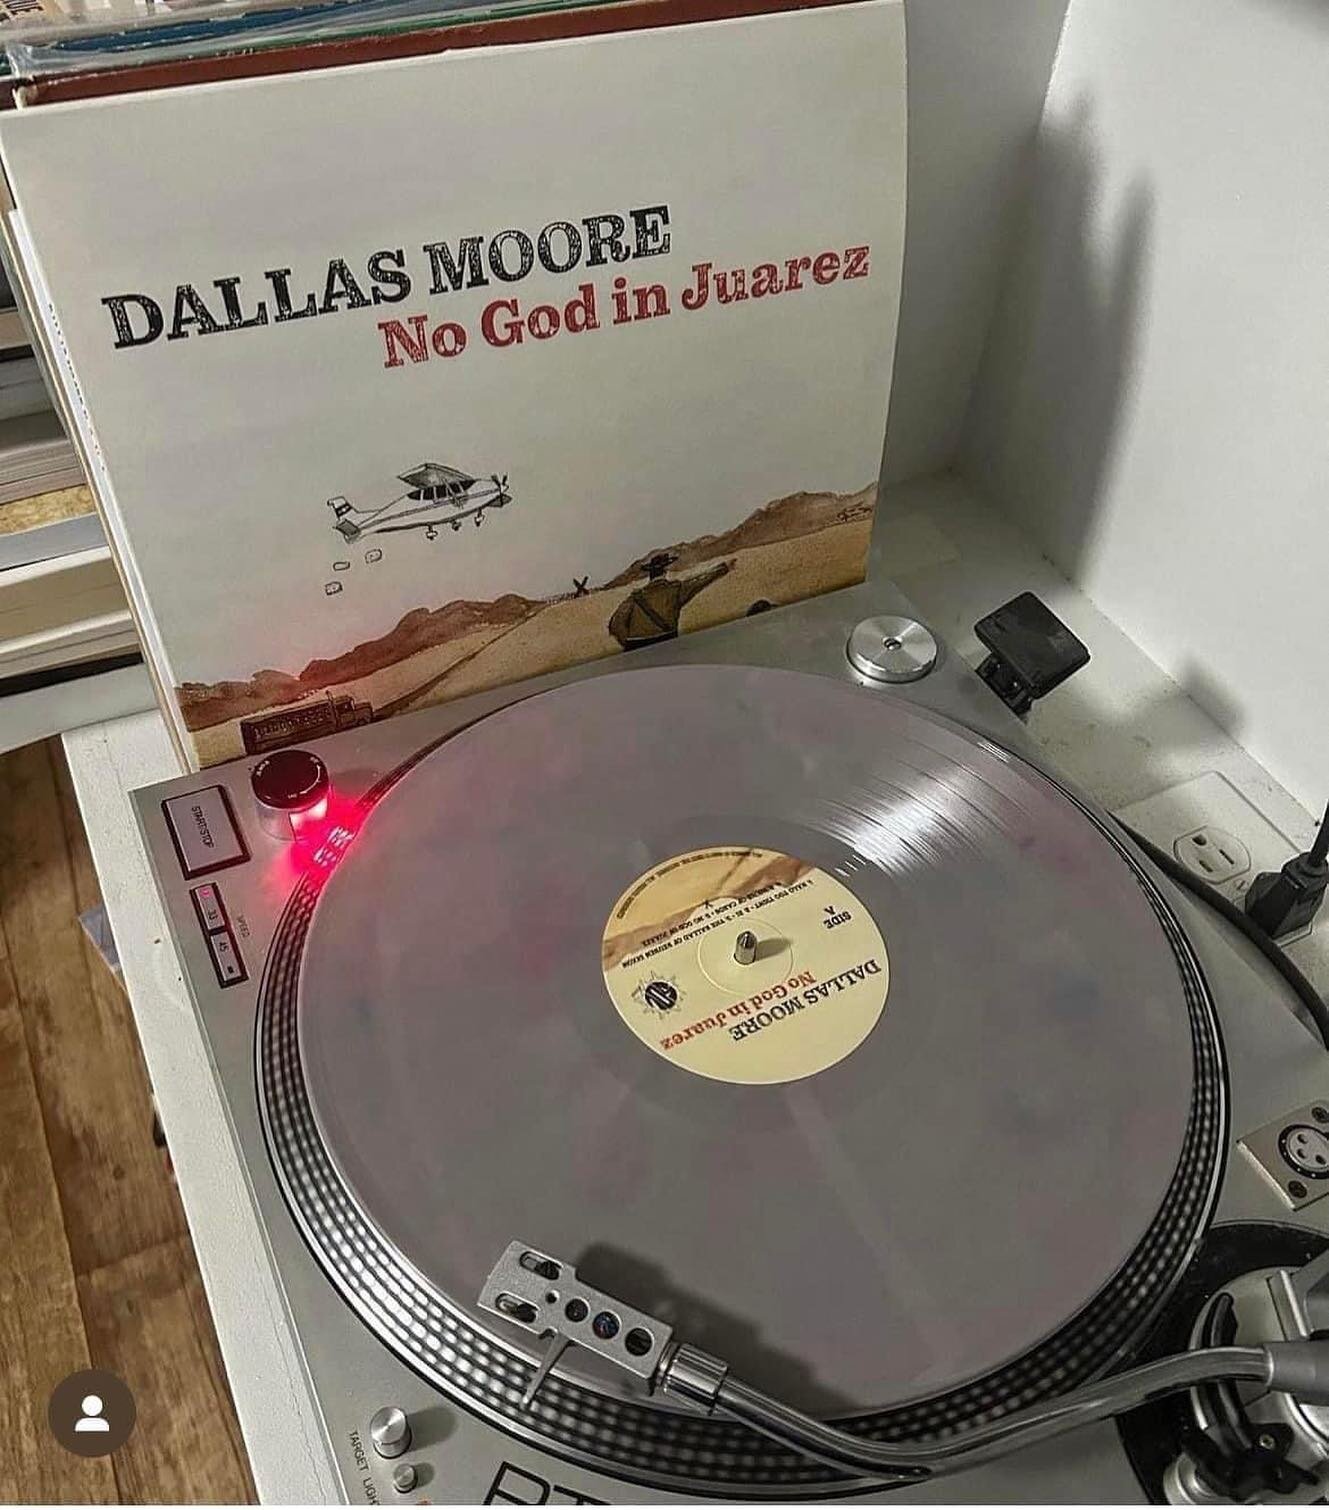 ‼️SOLD OUT: No God In Juarez ‼️

🔥 1st Pressing Vinyl Preorders are Officially SOLD OUT as are all HOUSE CONCERT PACKAGES! 

💿 CDs and T-shirts are still available and shipping online at www.dallasmoore.com/store

💿 All CDs are Numbered &amp; Sign